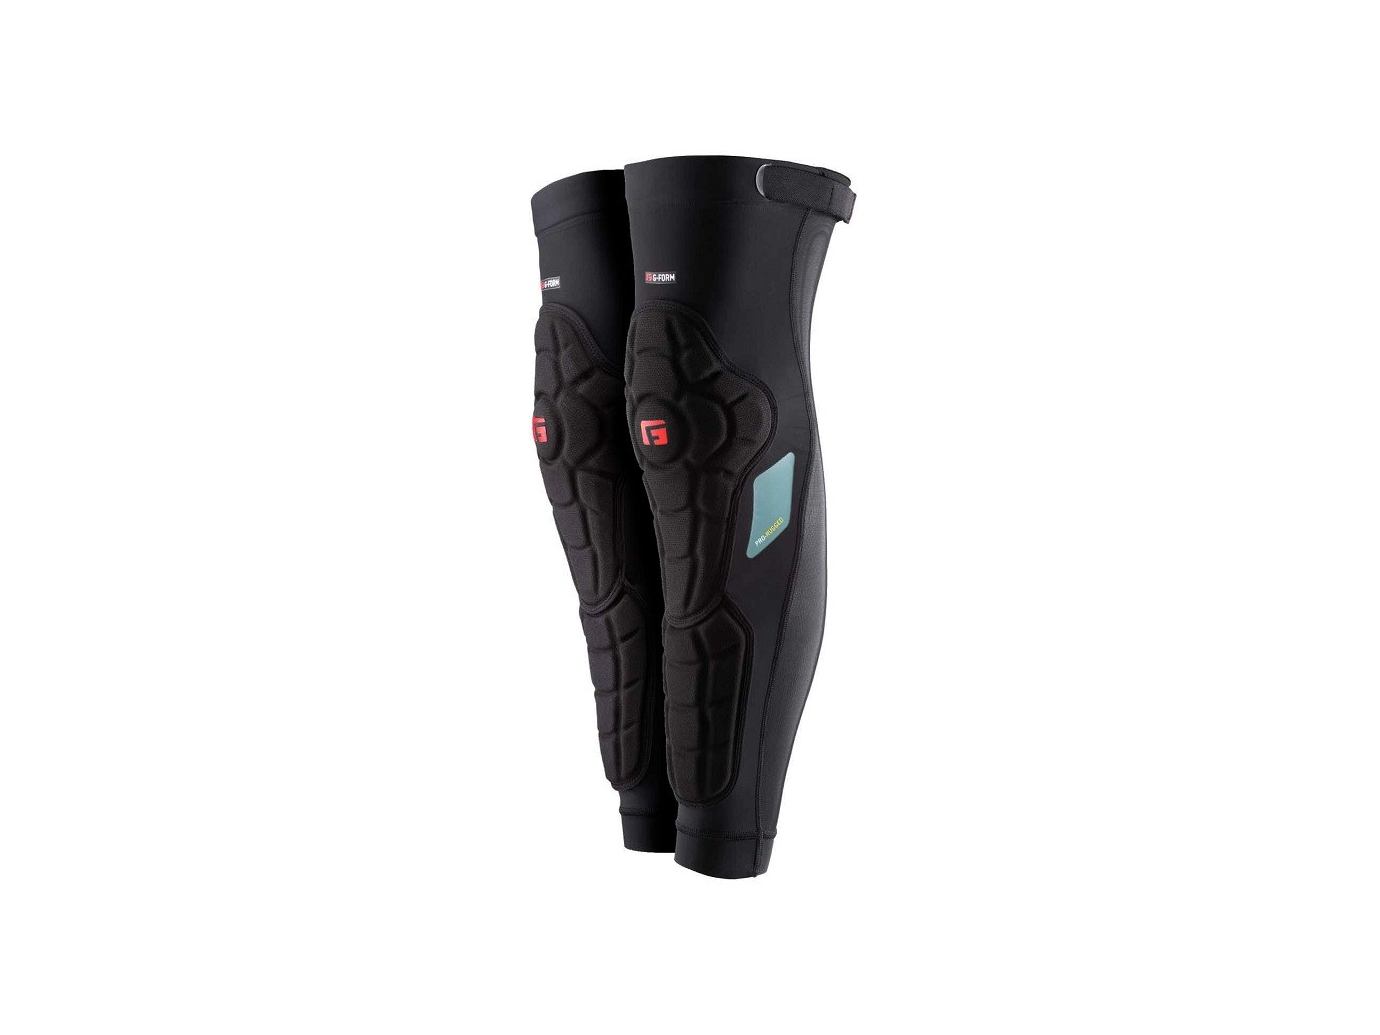 Protège Genou-Tibia G-FORM Pro Rugged Taille XS